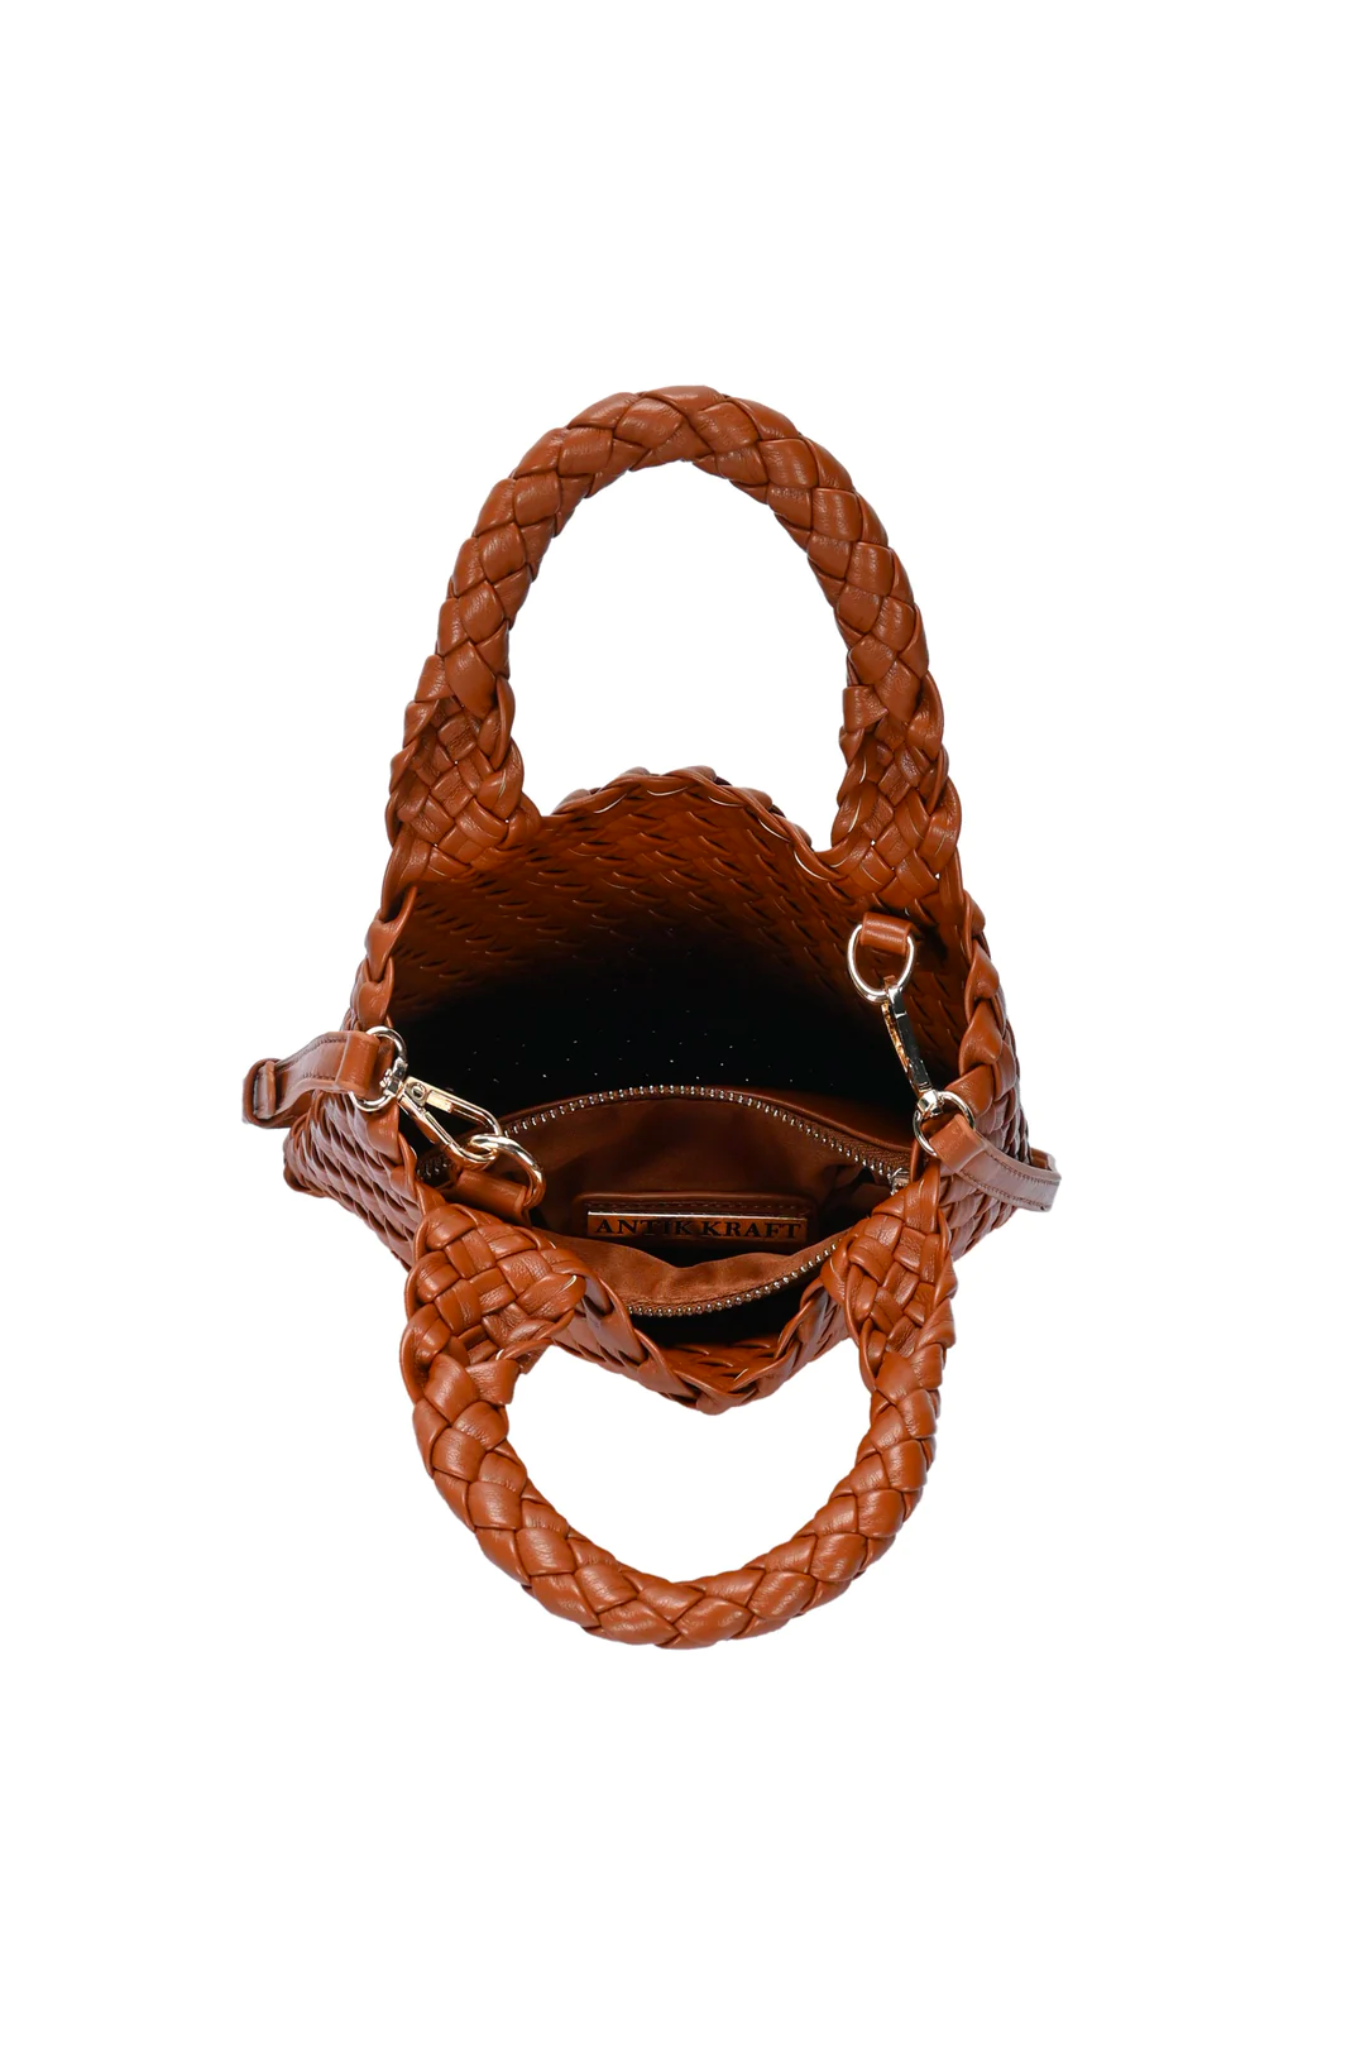 2 in 1 Woven Handle Tote Bag with Clutch Set in Camel_Interior